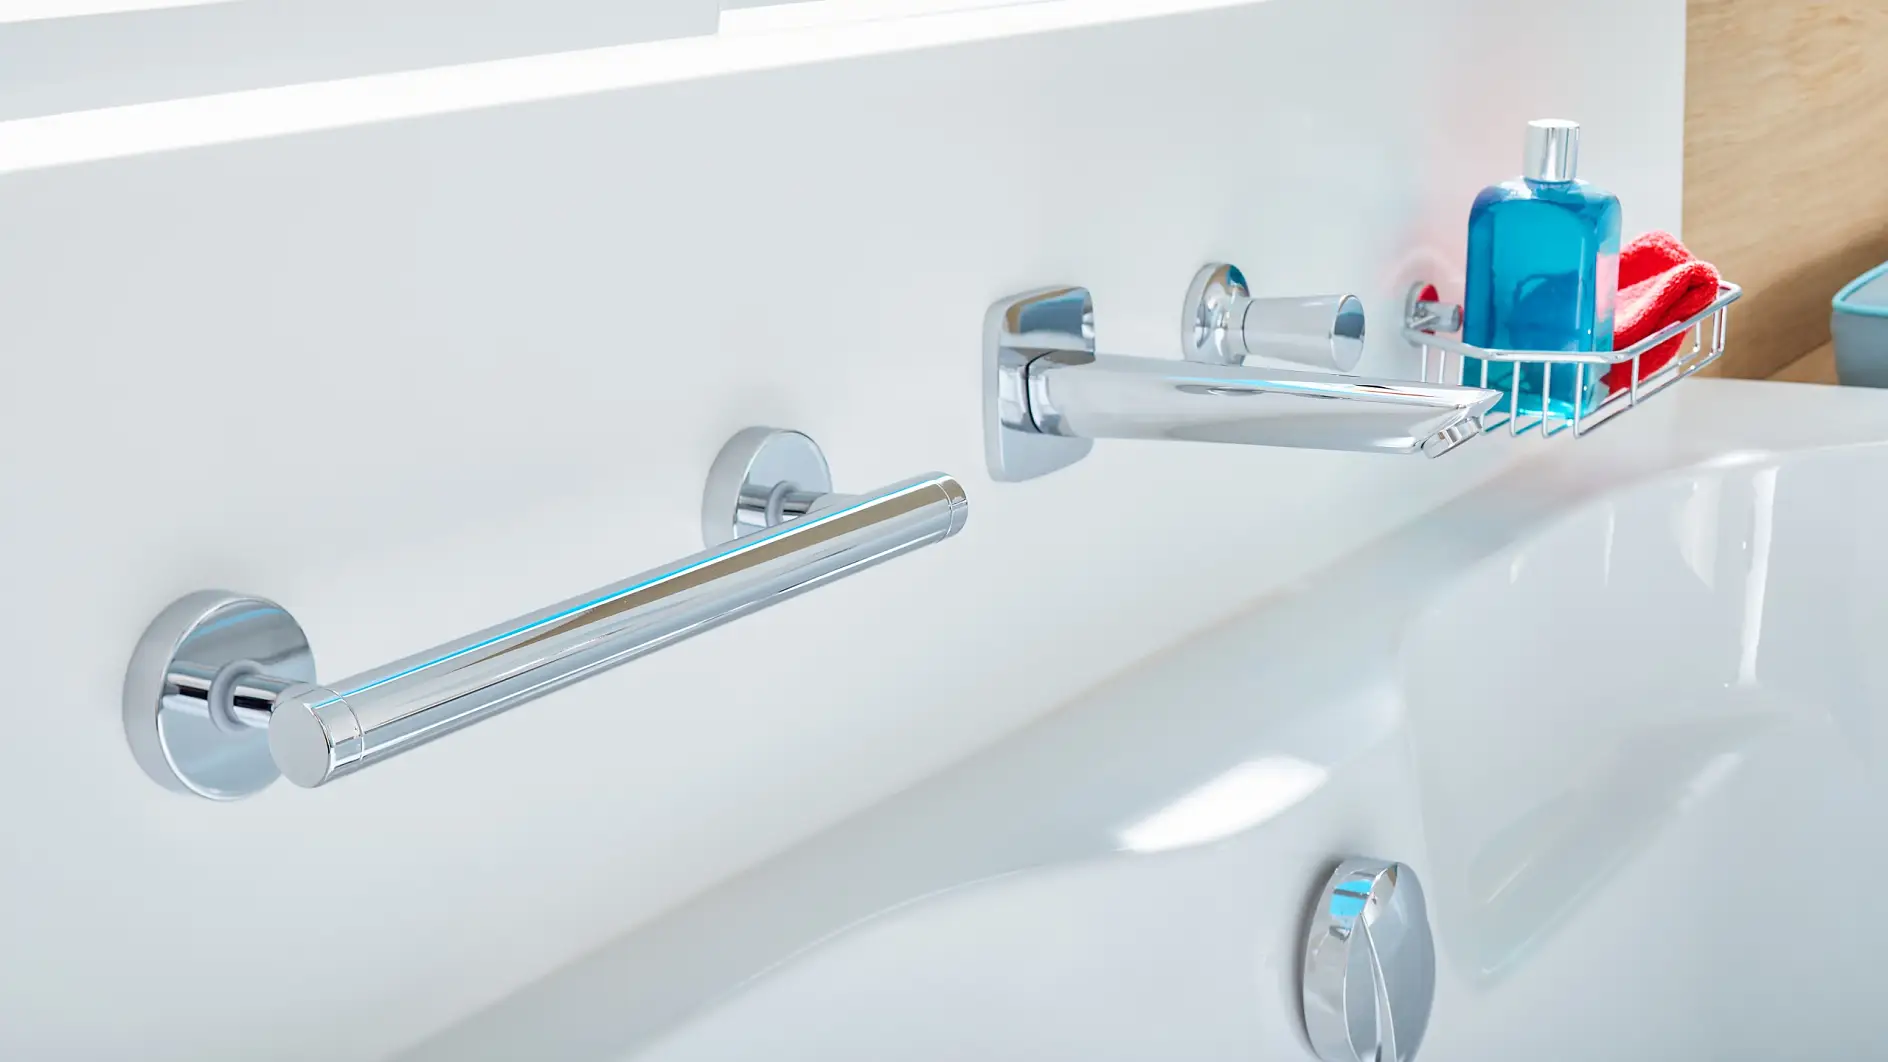 Bathrooms will forever be slippery. Stay safe with our bathtub handles for secure hold.